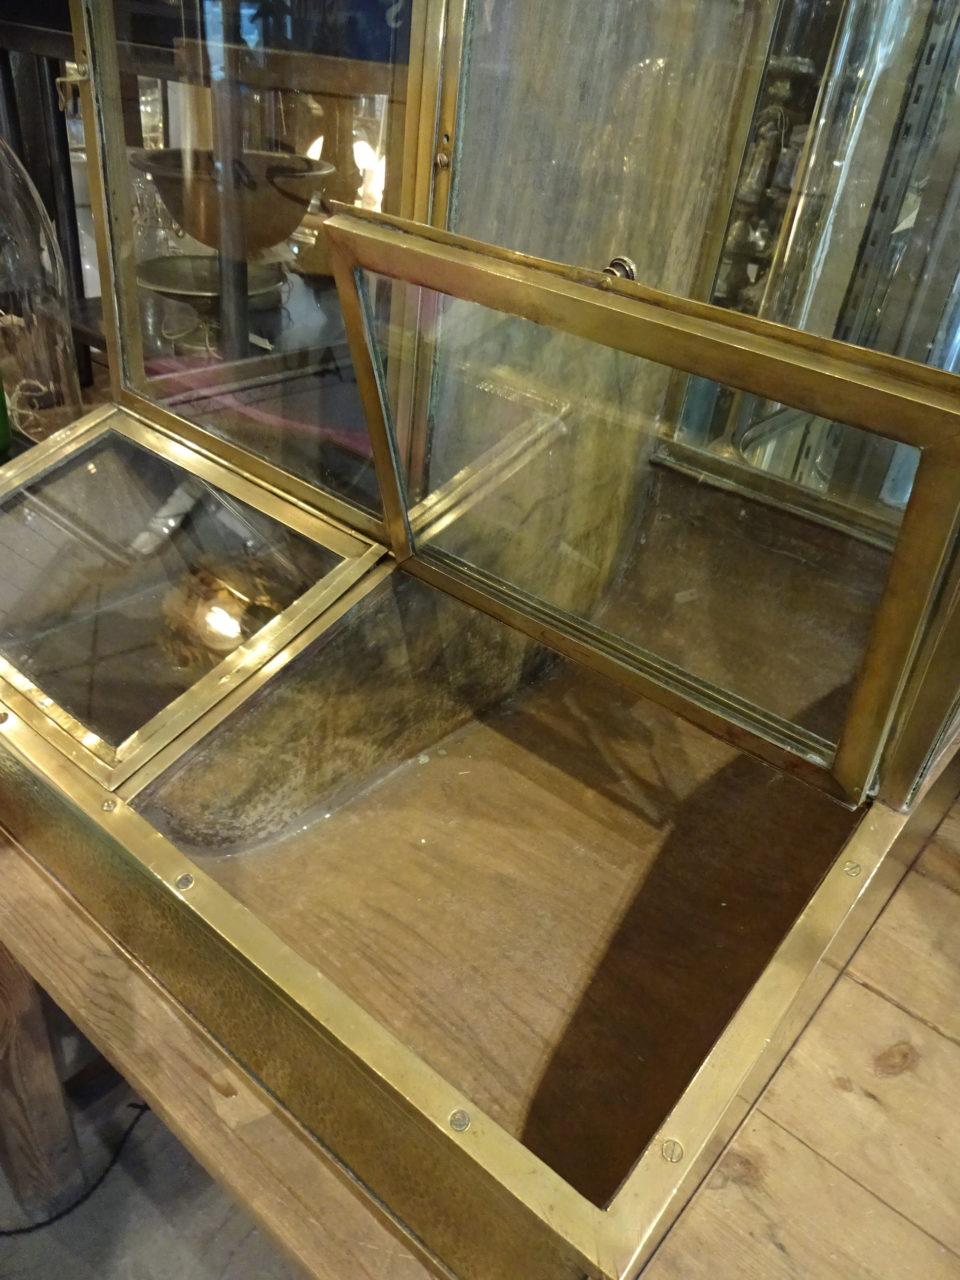 Elegant high quality vintage French brass and glass coffee display cabinet, originally from a shop in Lyon, circa 1890s. A wonderful and eye-catching way to store food wares or for boutique display.